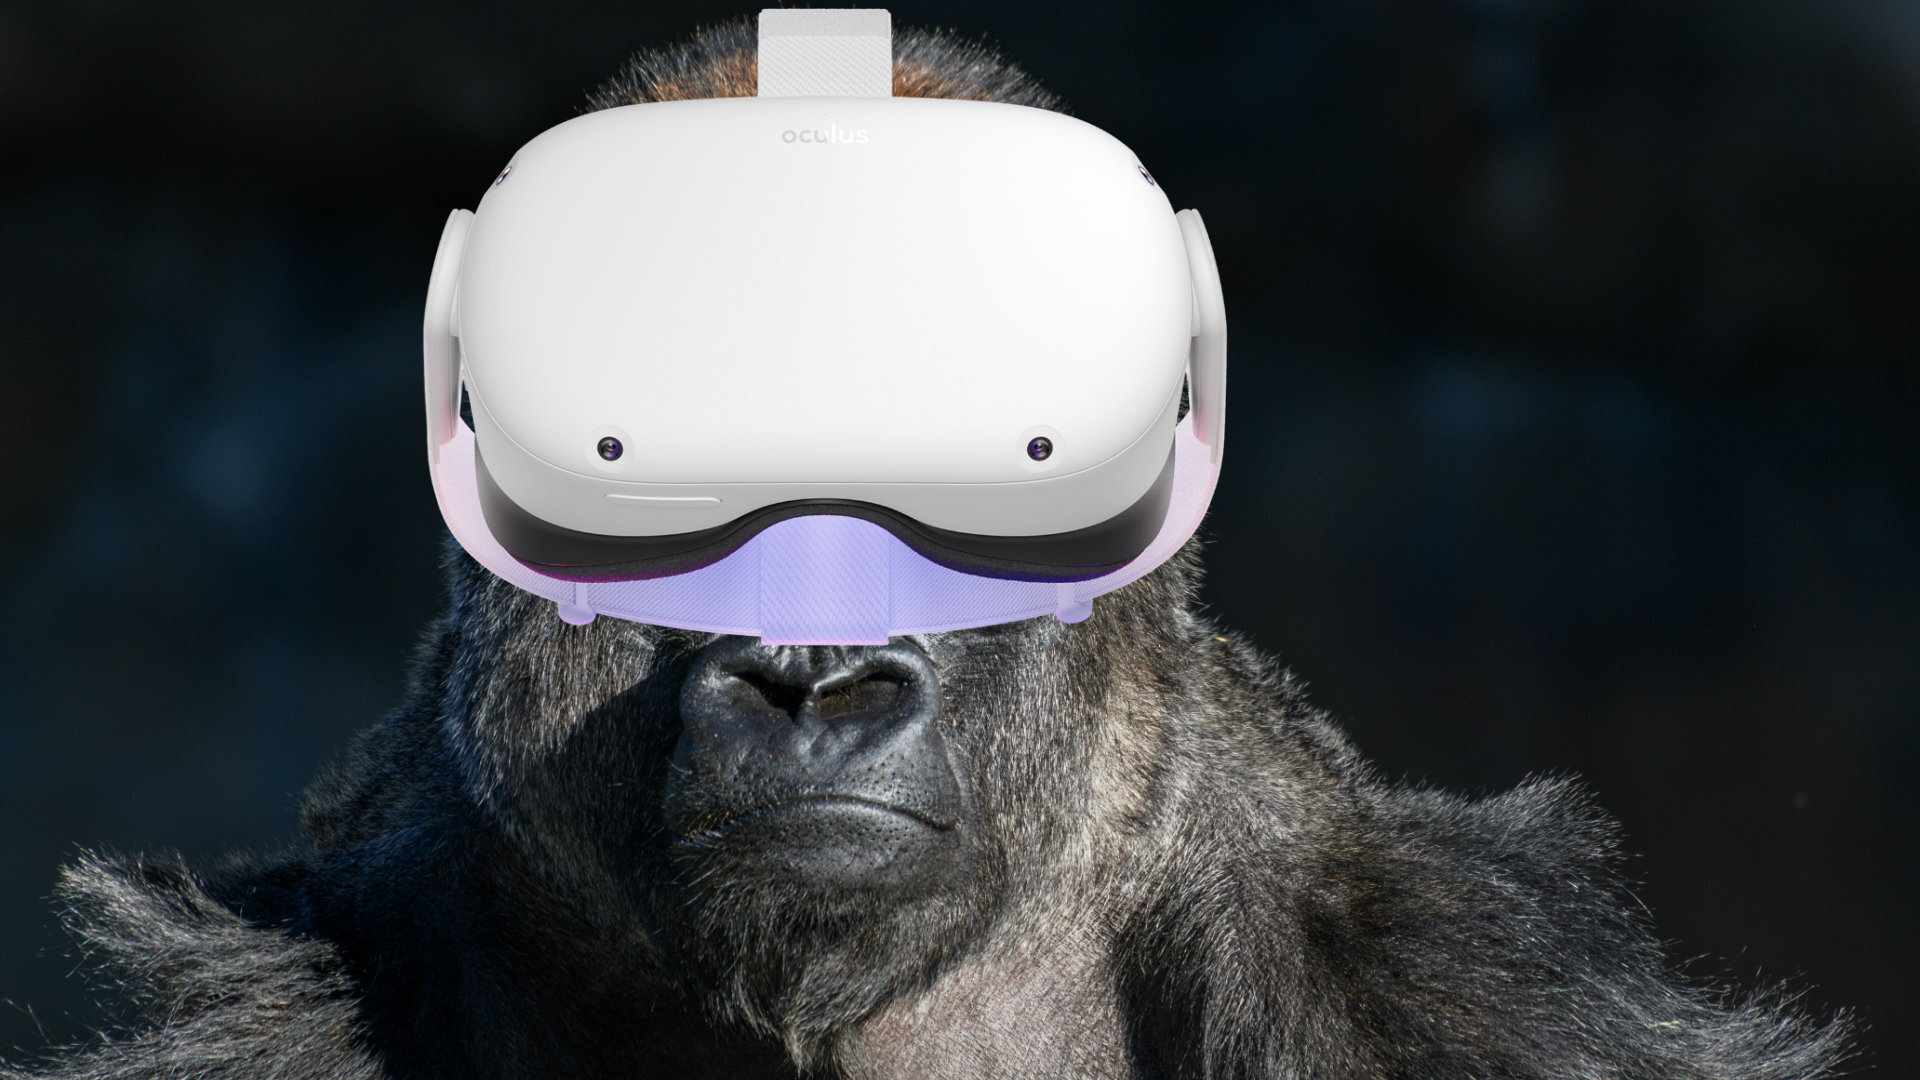 Gorilla arm is a VR injury Oculus Quest 2 users must beware of